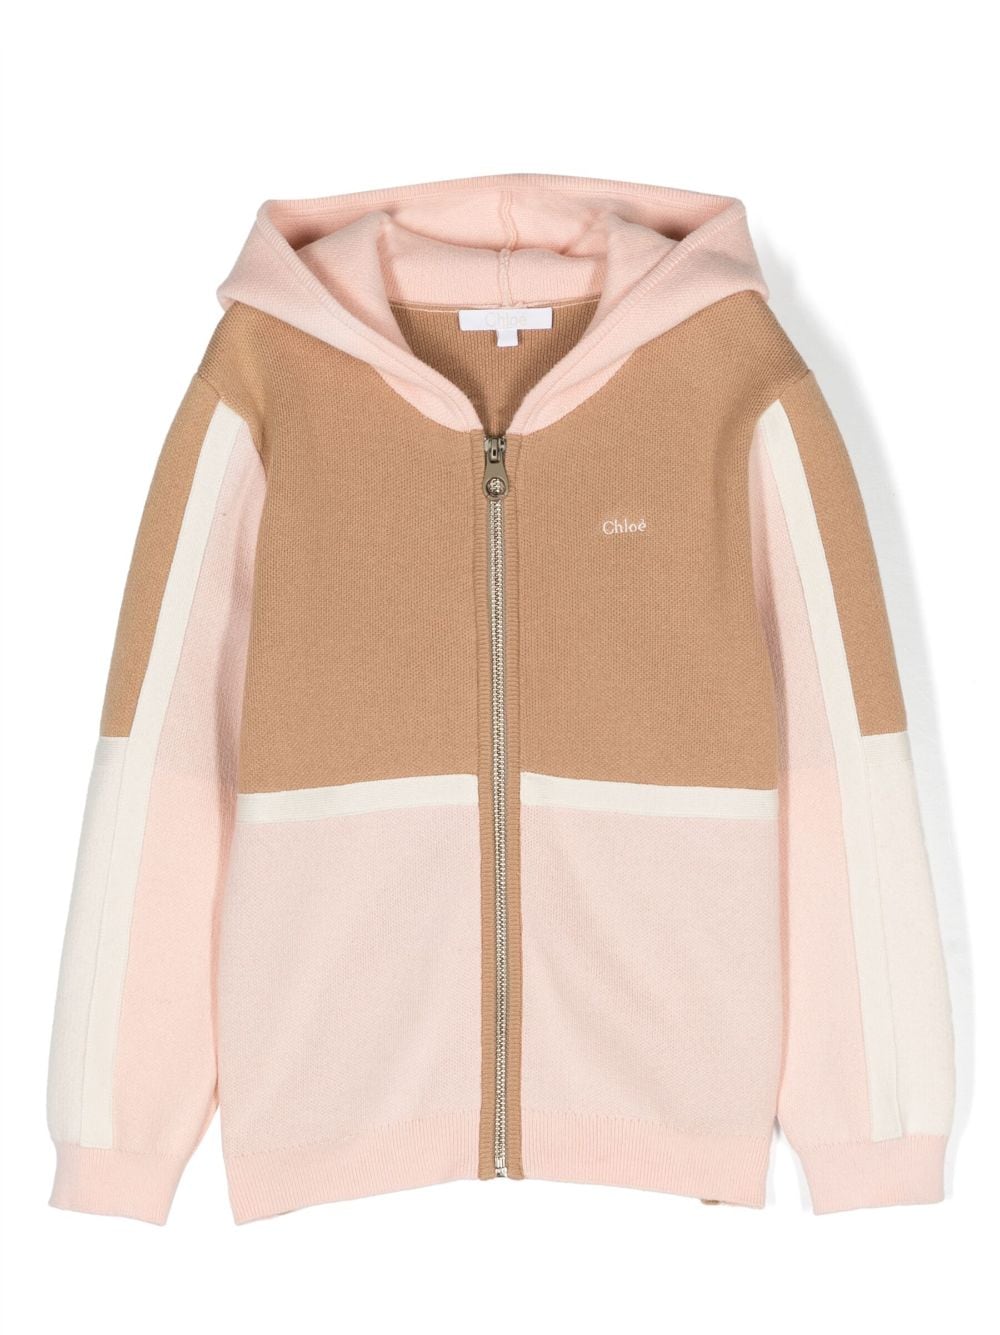 Chloé Kids logo-embroidered panelled cardigan - Neutrals